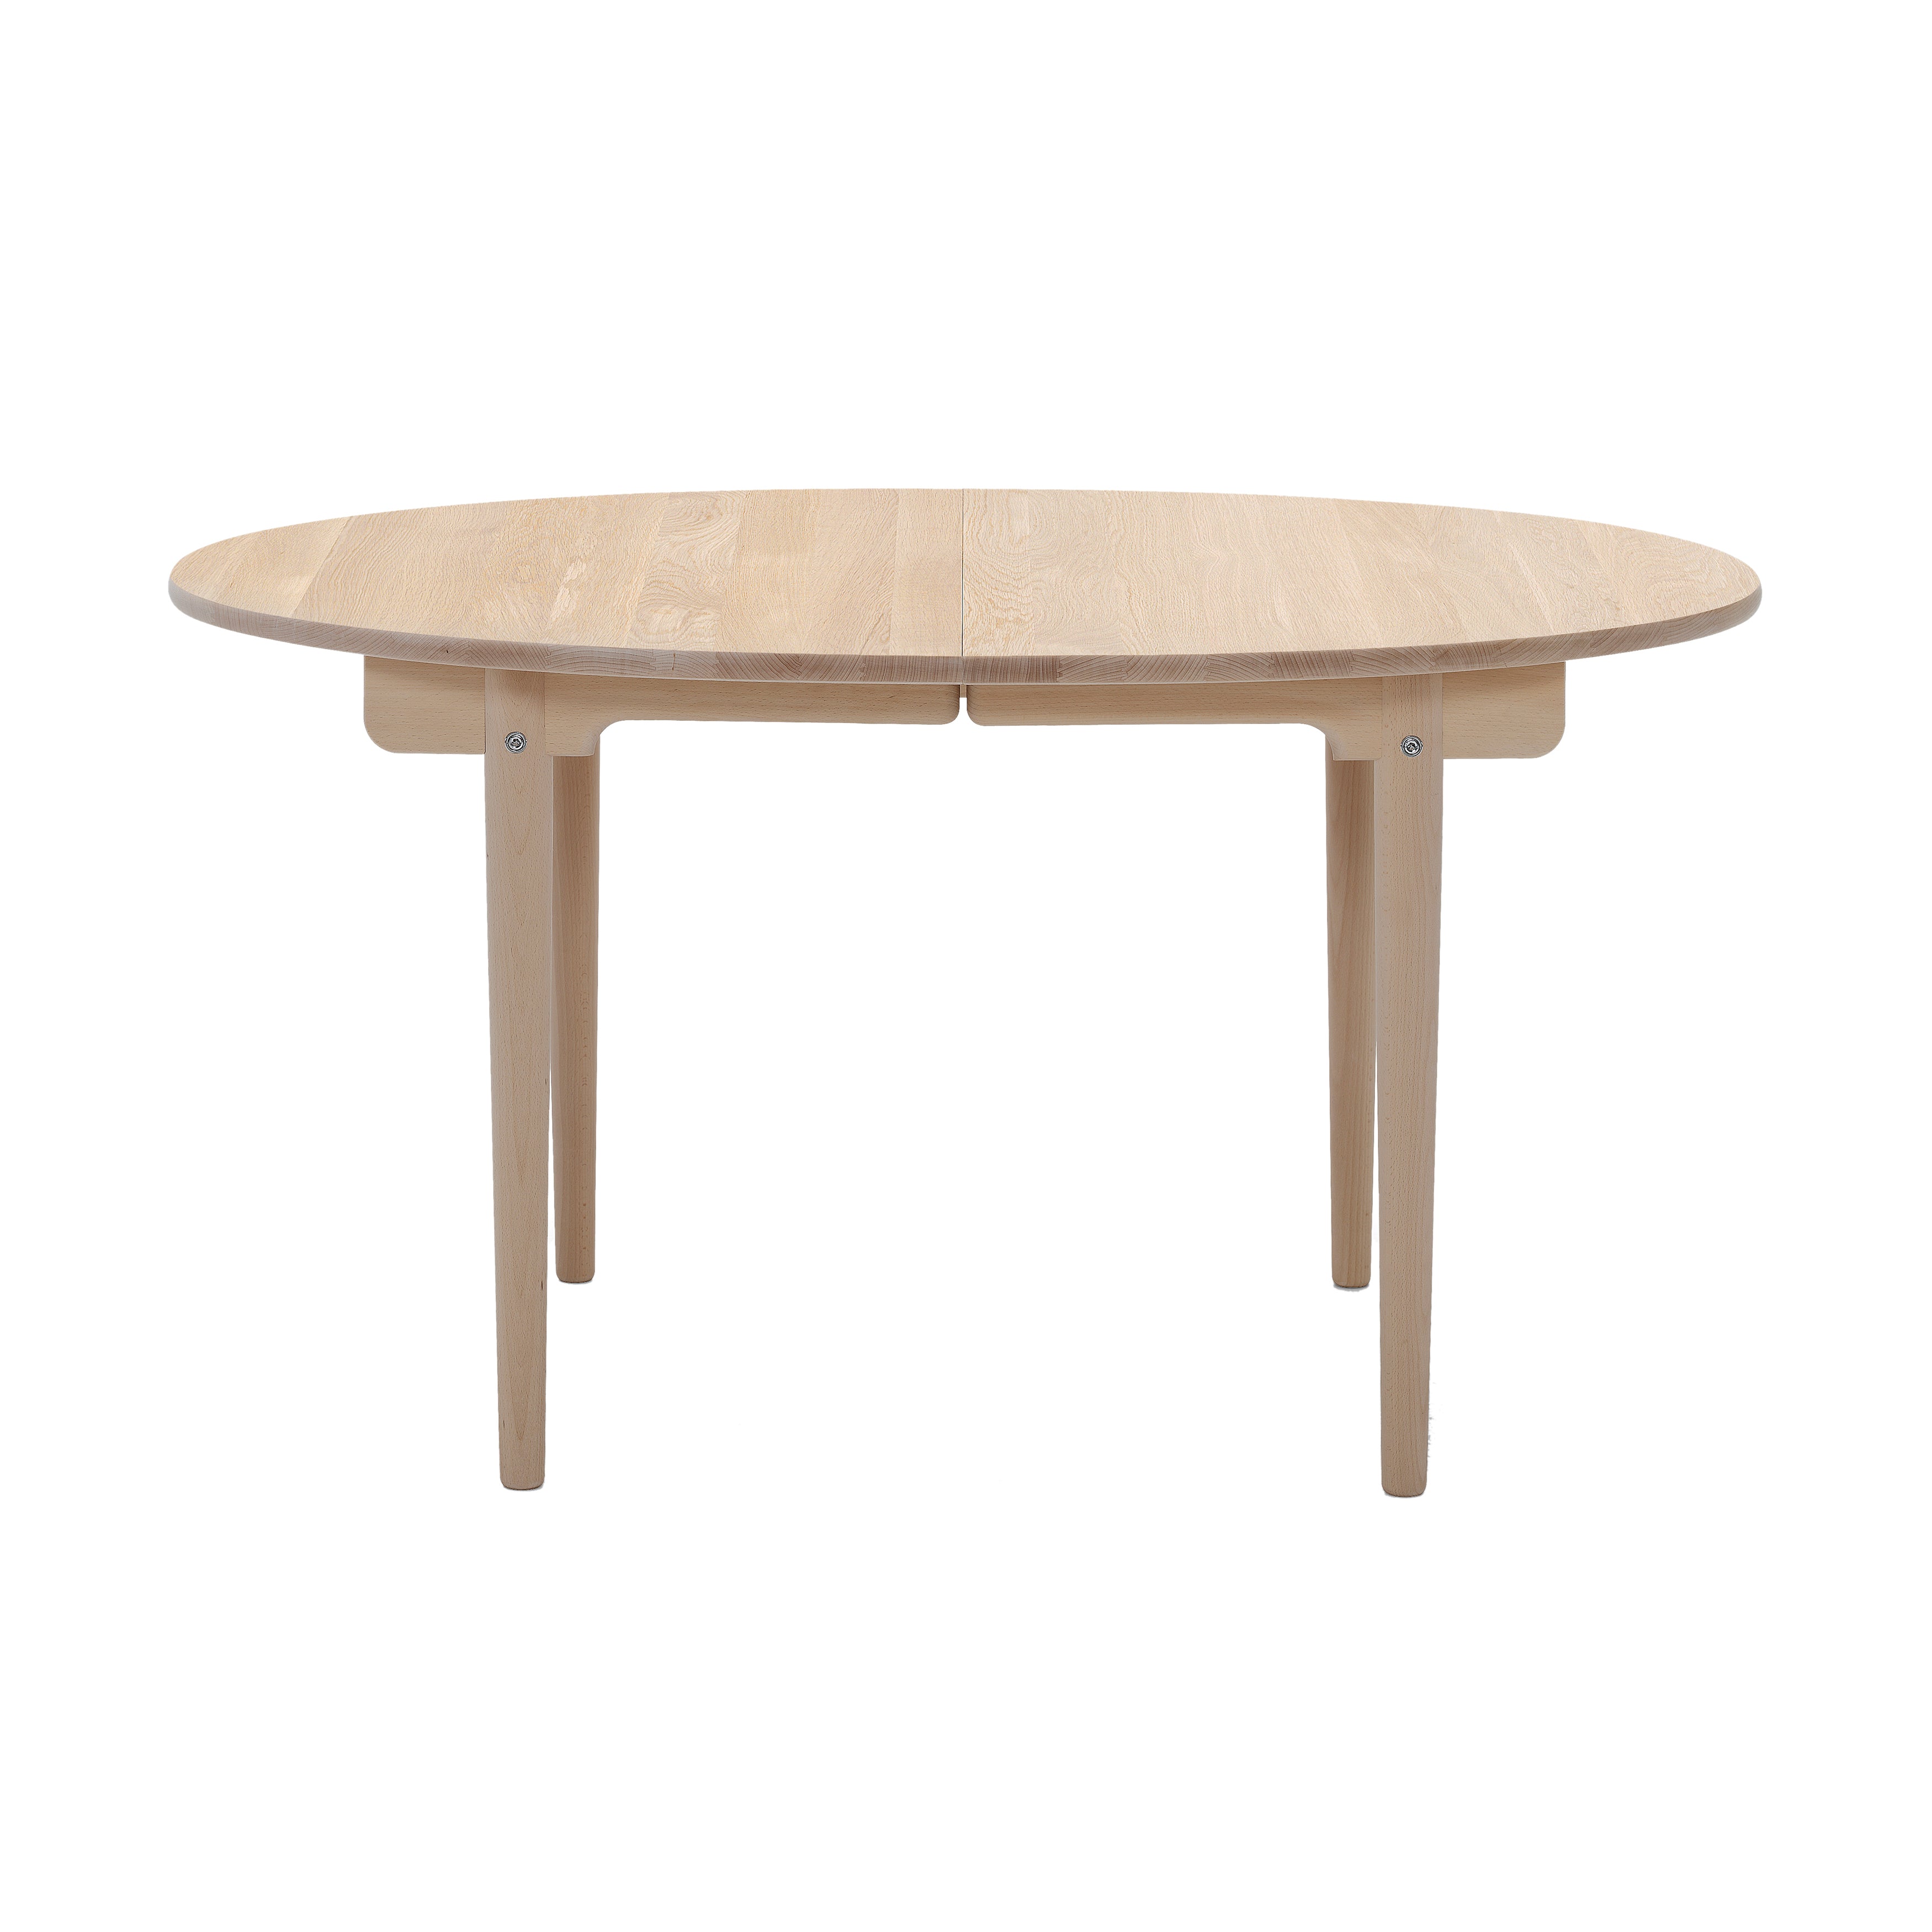 CH337 Dining Table: White Oiled Oak + Without Leaf